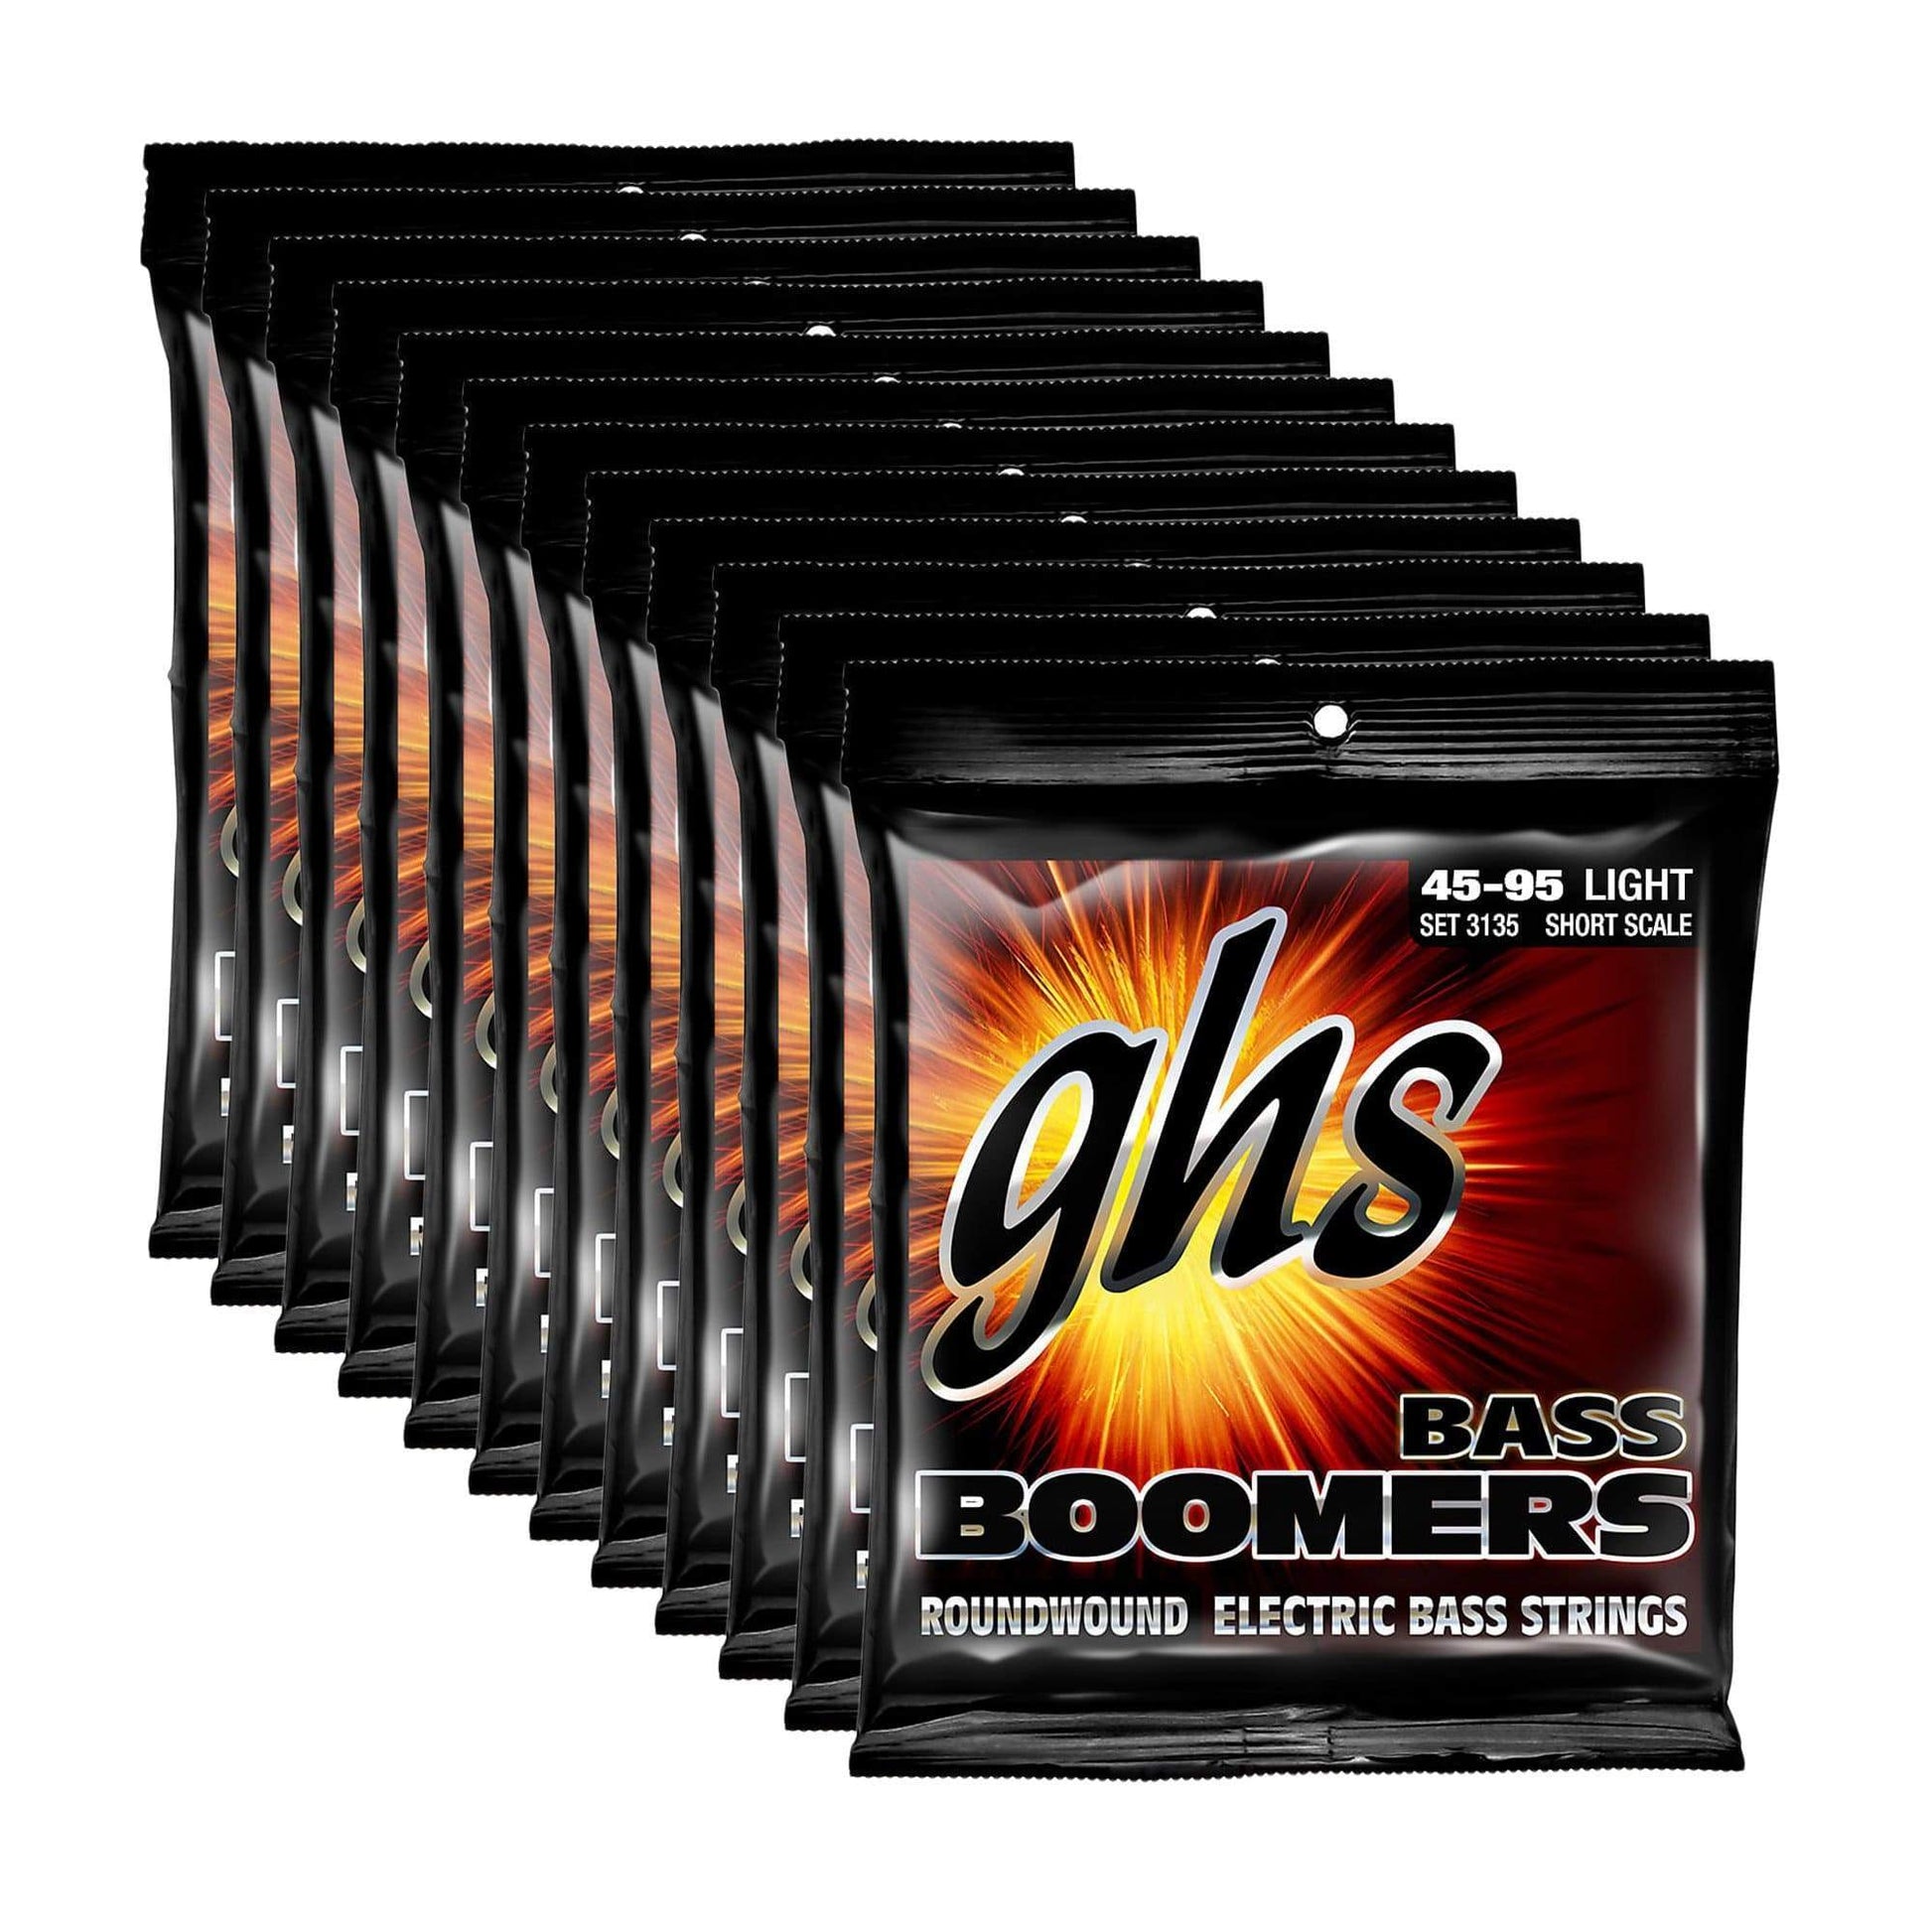 GHS 3135 Bass Boomers 45-95 Short Scale 12 Pack Bundle Accessories / Strings / Bass Strings